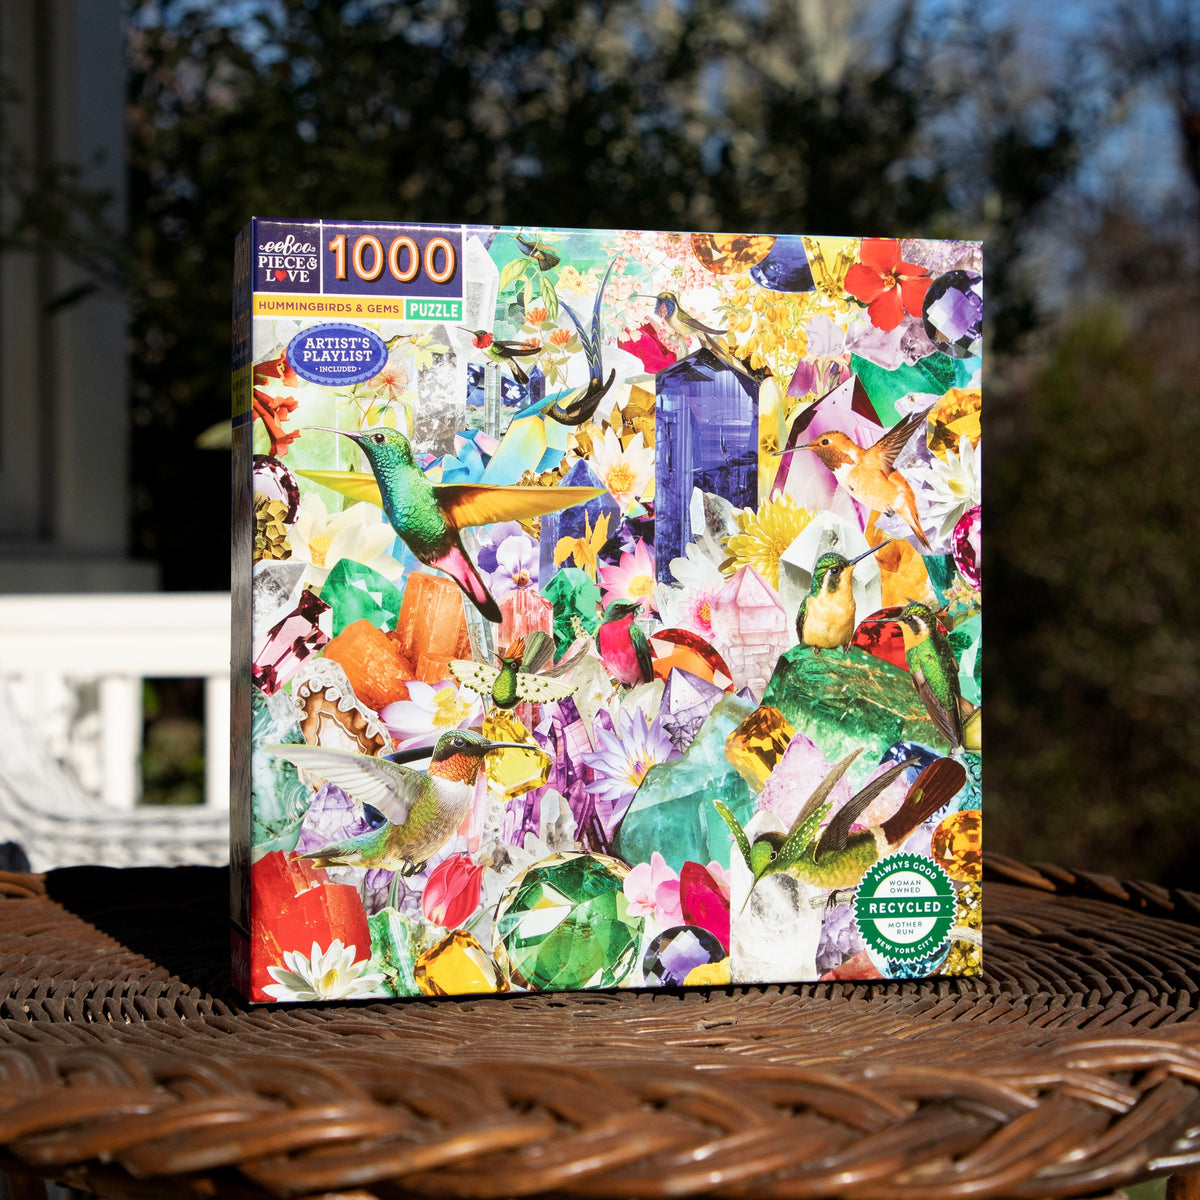 Hummingbirds and Gems 1000pc Puzzle - Heart of the Home LV